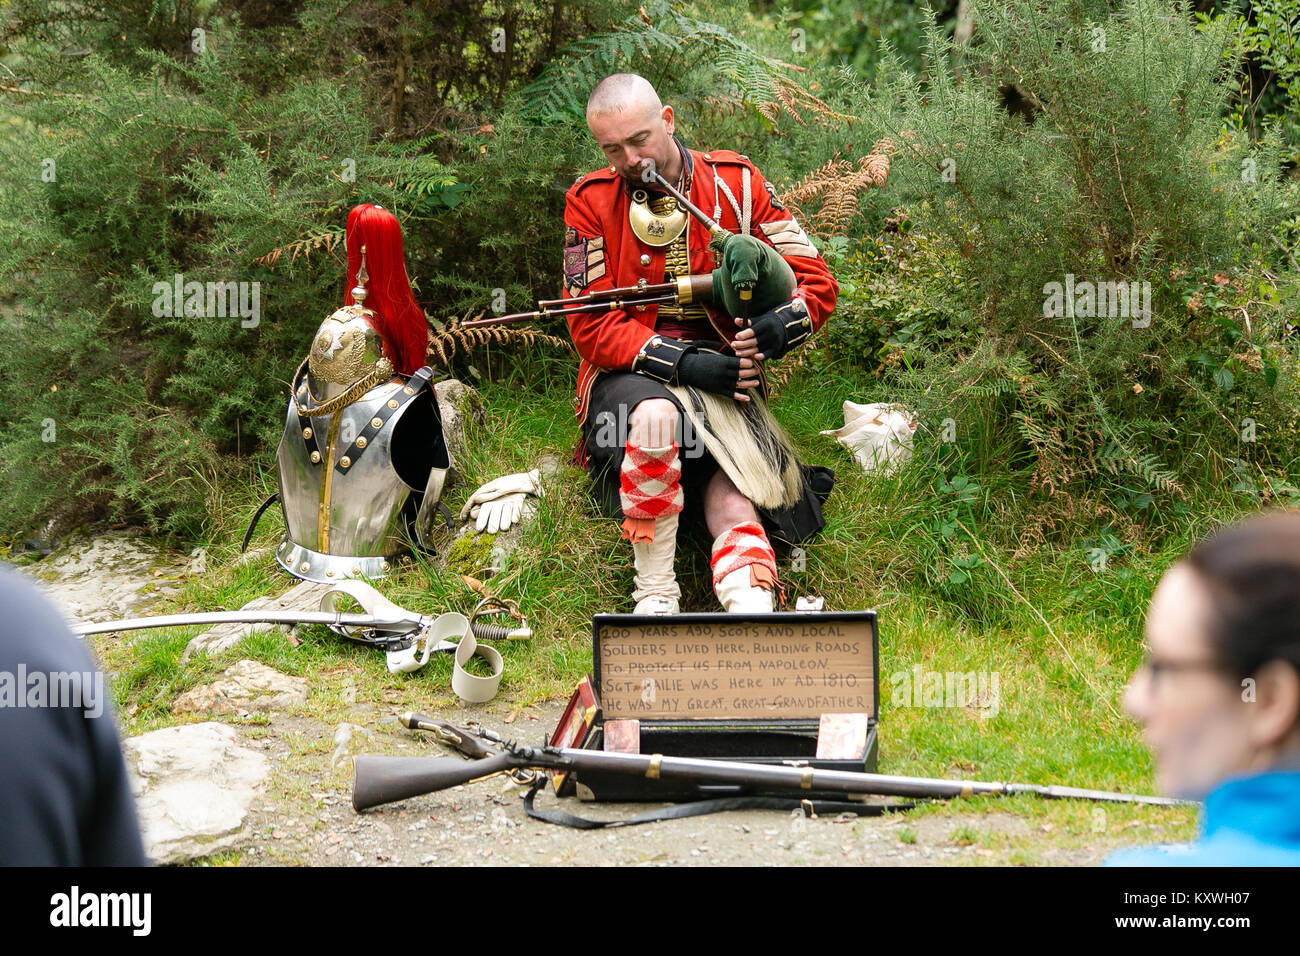 Man busking dressed in Scottish Soldier Outfit sitting by his armor and playing bagpipes at the entrance to the monastic site in Glendalough Valley Stock Photo